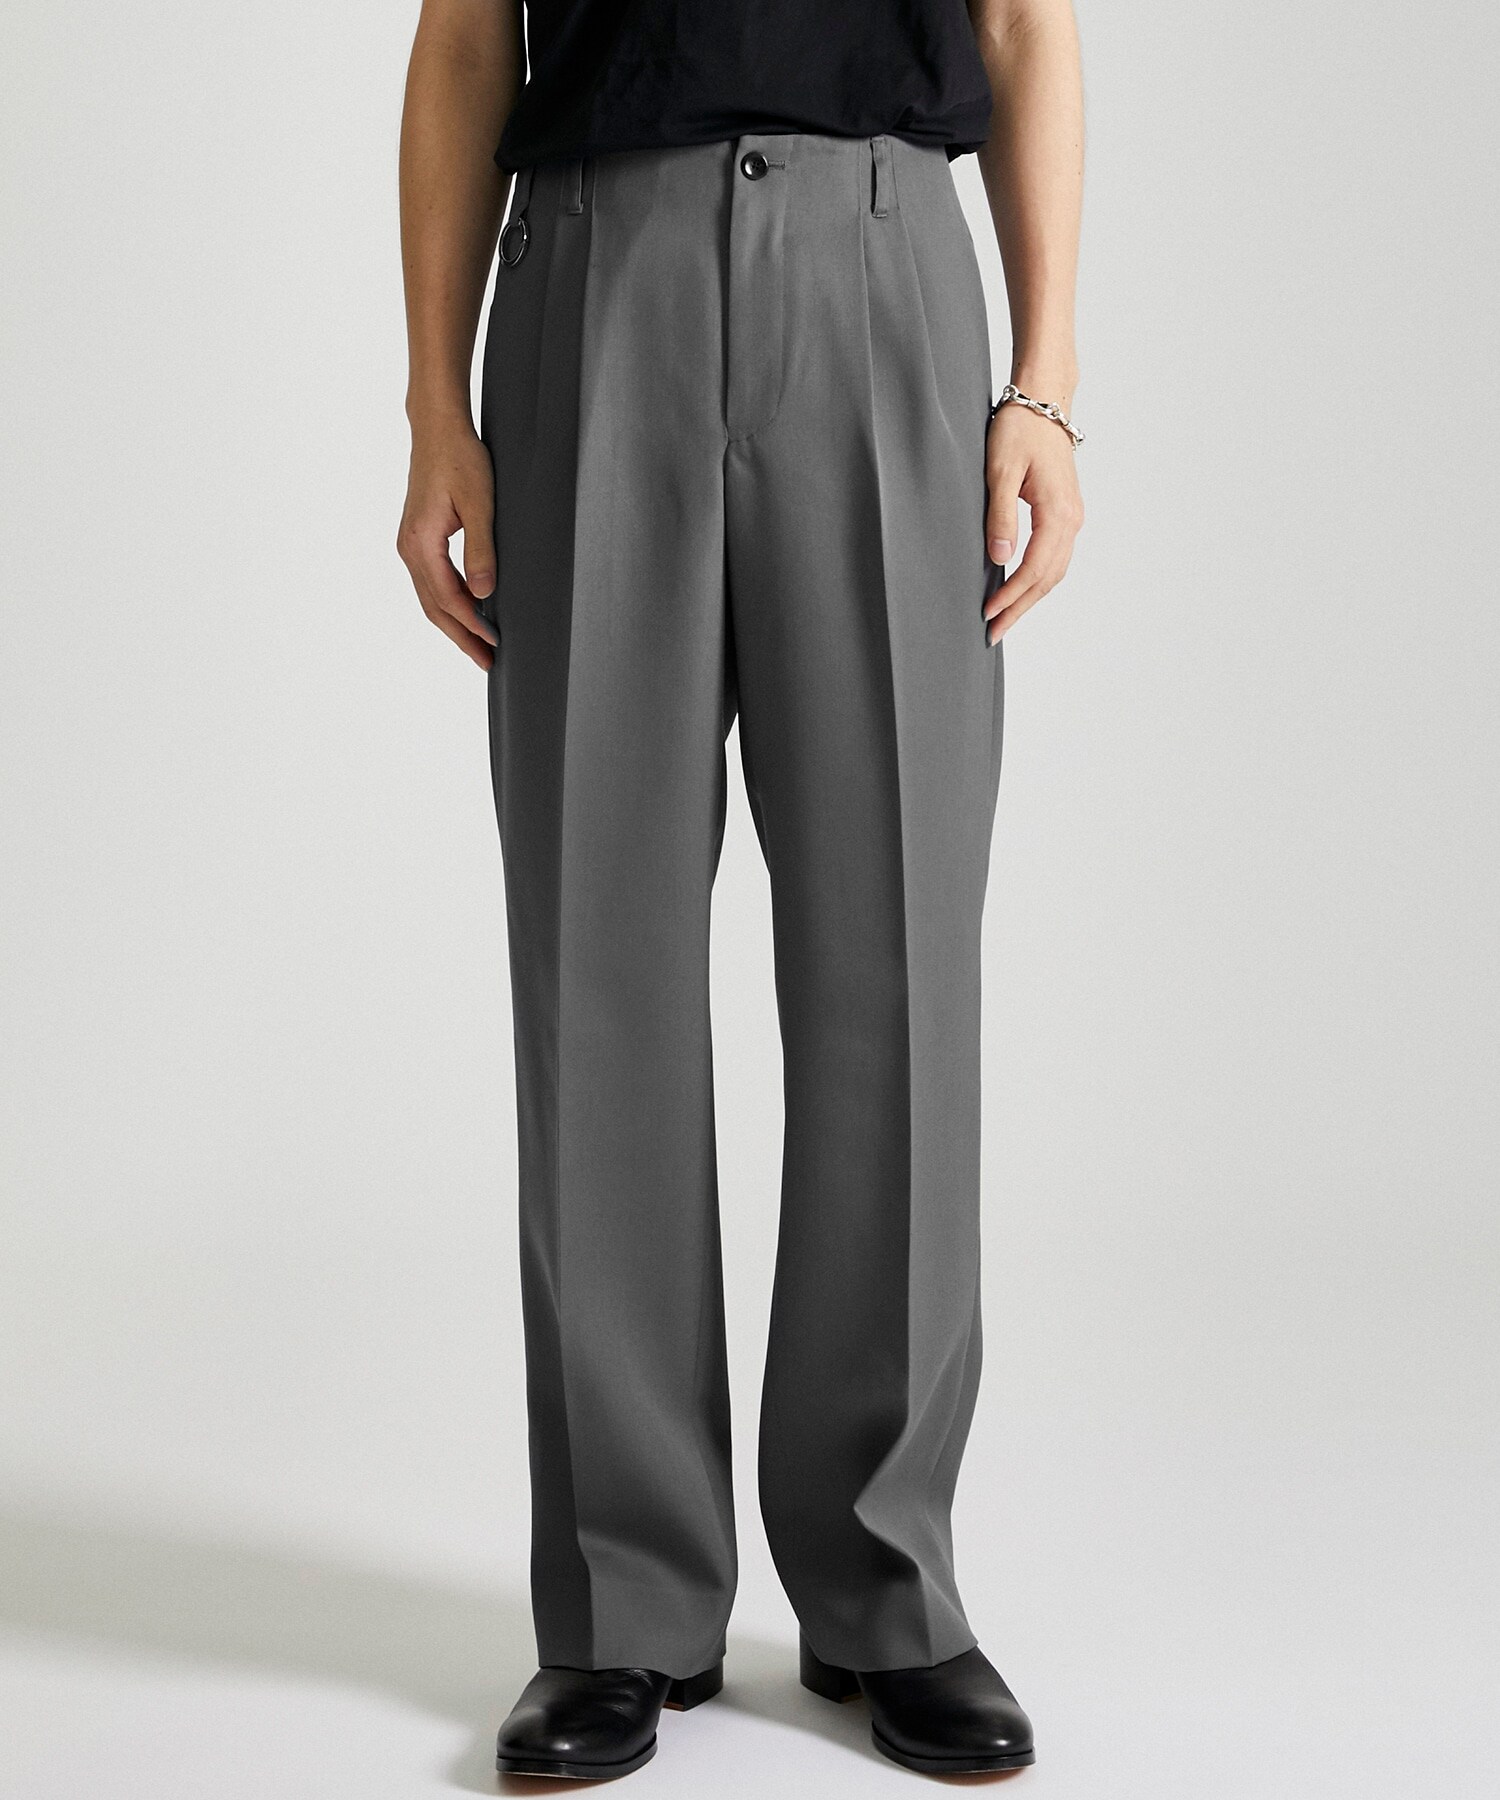 QUINN / Wide Tailored Pants